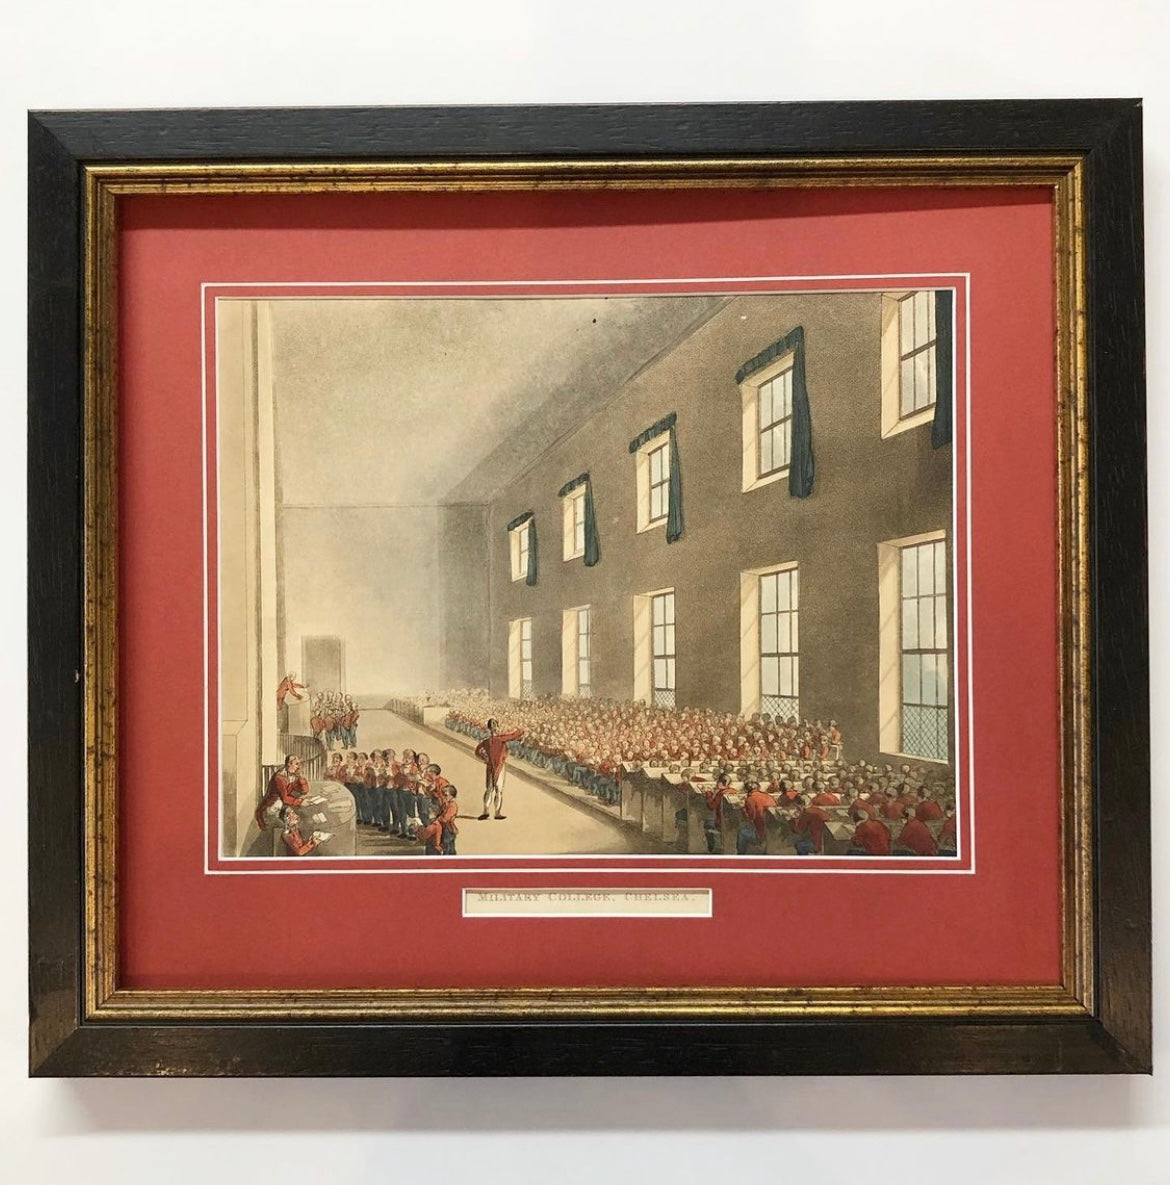 A Pair of Aquatint Prints of Chelsea Hospital and Chelsea Military College by Augustus Charles Pugin and Thomas Rowlandson